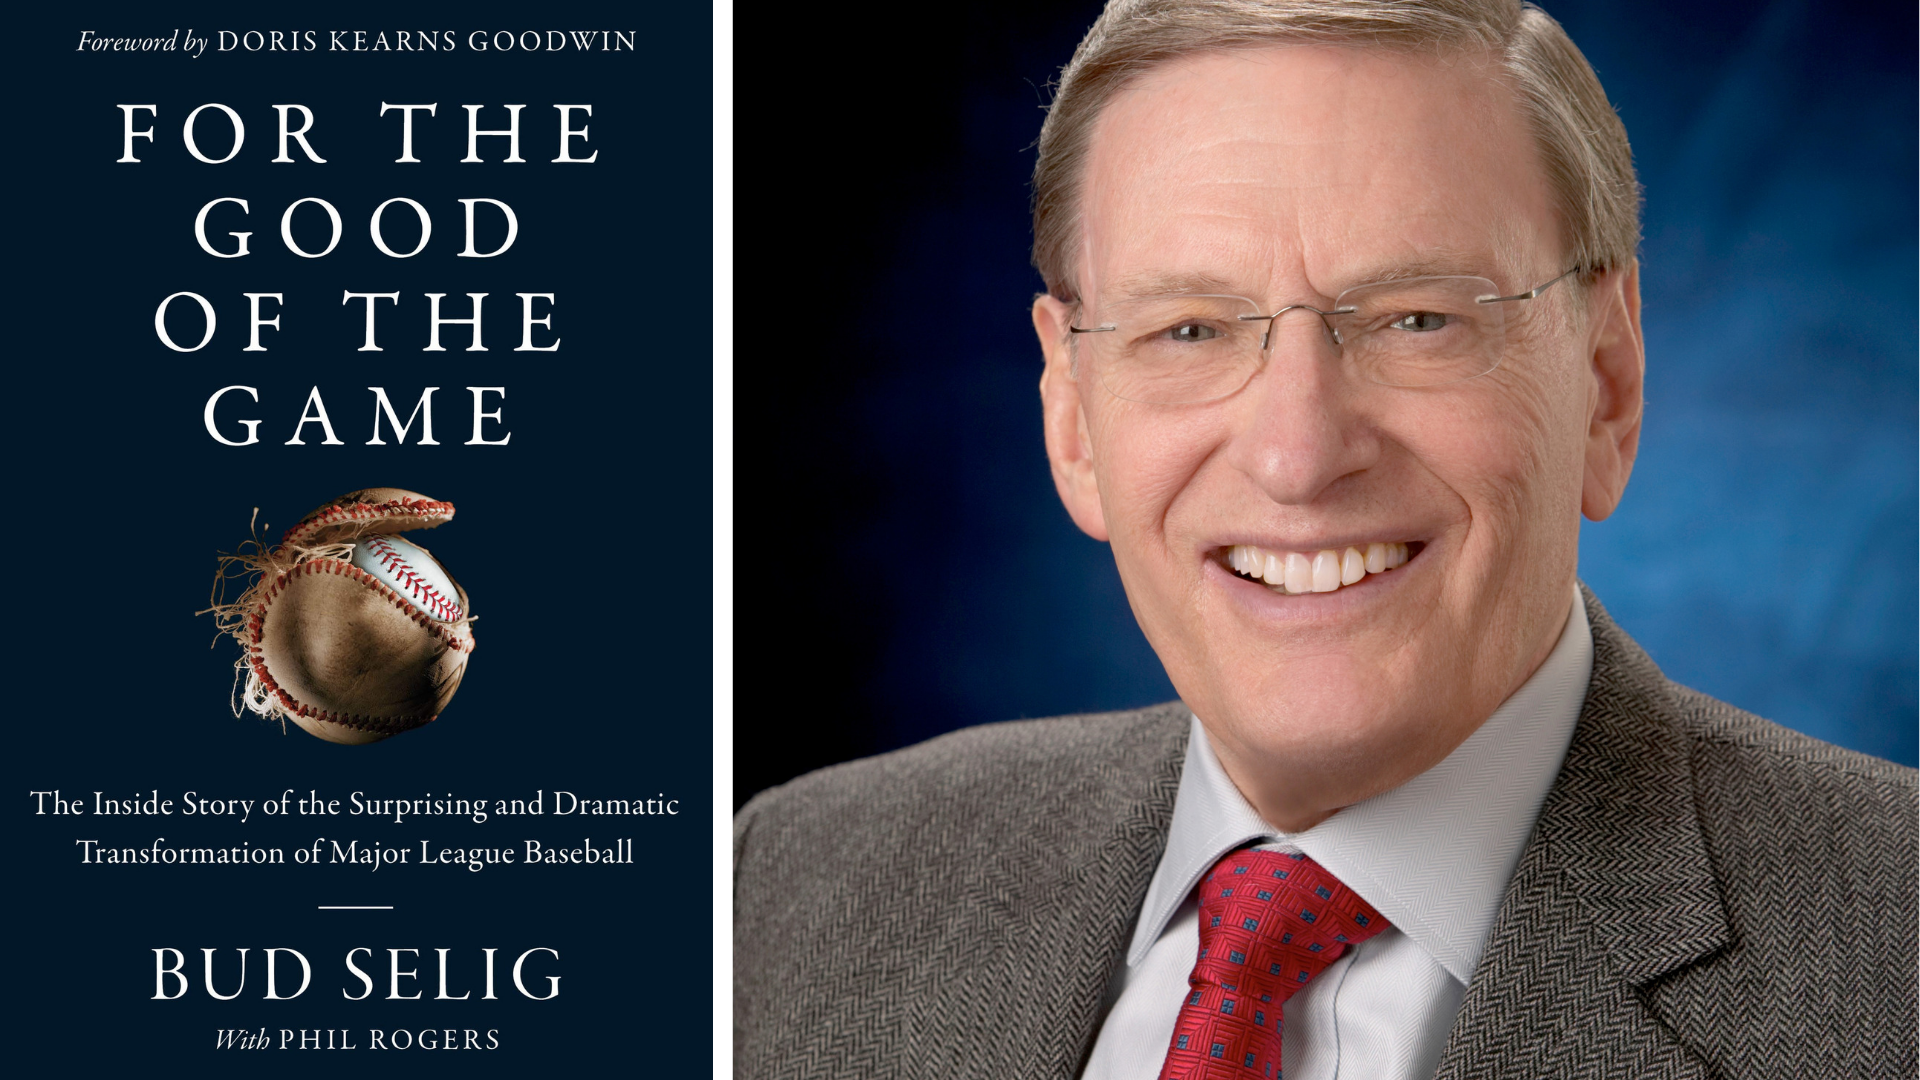 For the Good of the Game by Bud Selig